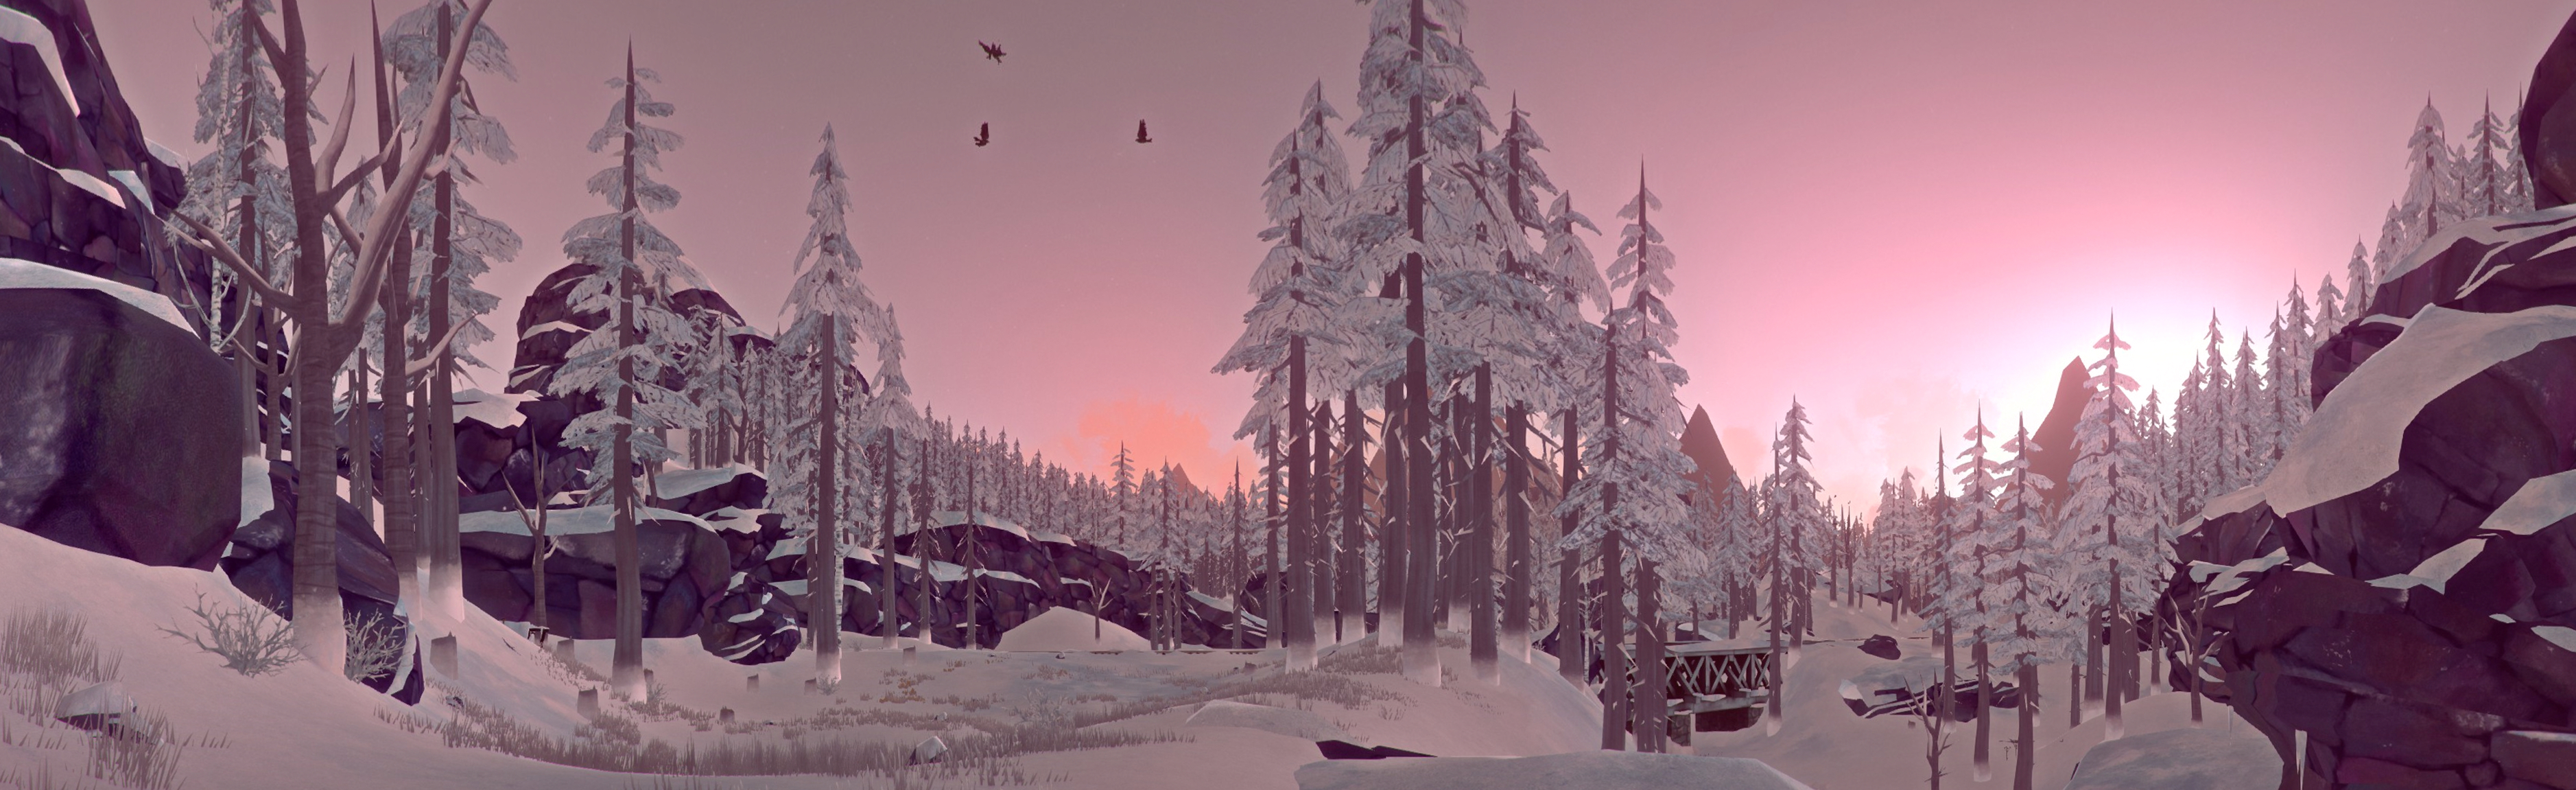 The Long Dark Forest Wood 3755x1151